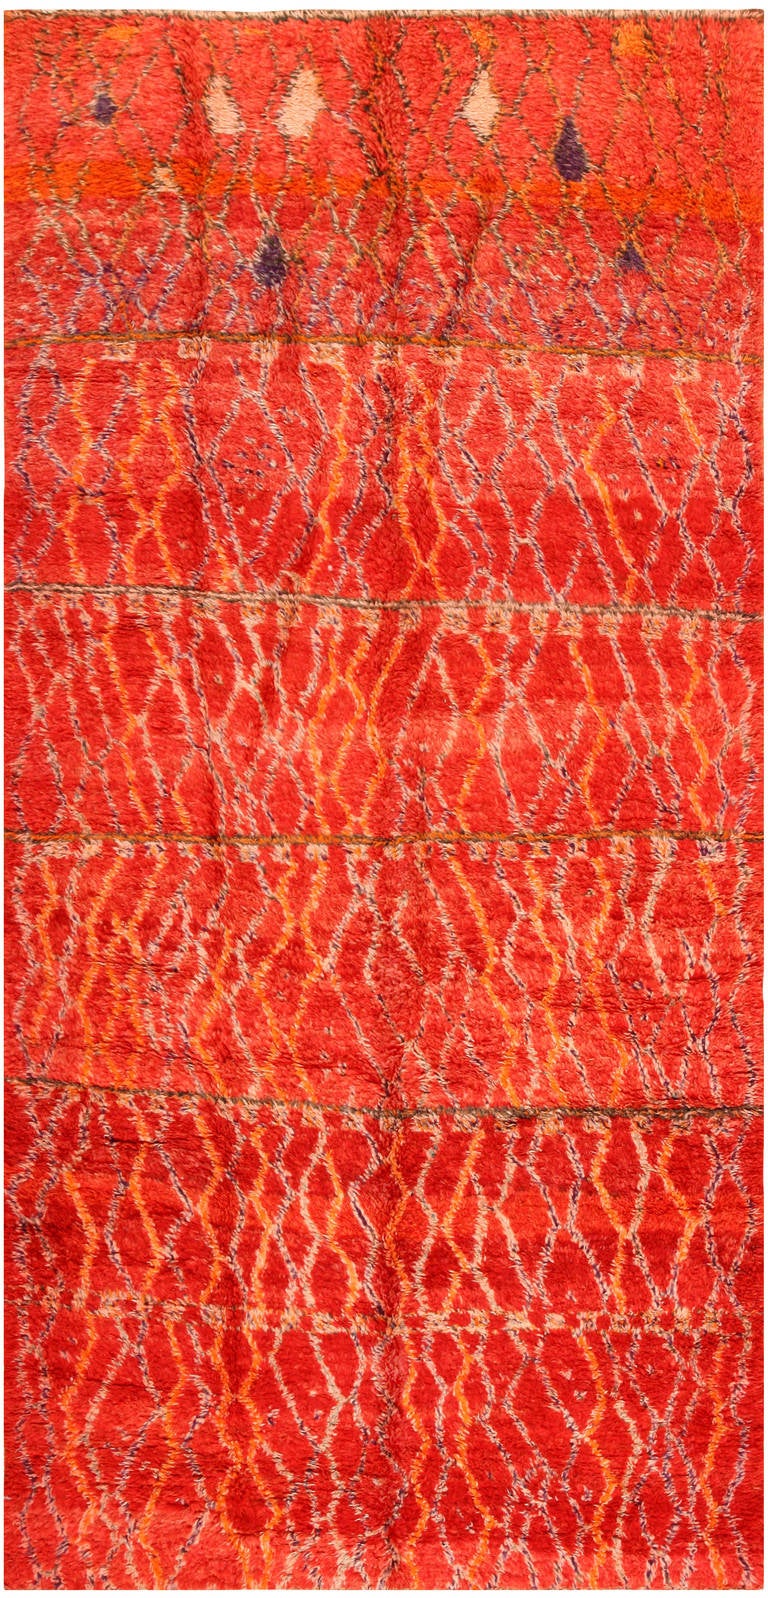 Red Vintage Moroccan Rug, Morocco, Mid-20th Century - Here is a beautifully composed and exceedingly appealing vintage carpet - a vintage Moroccan rug, woven in the mid-twentieth century. While mid-century Moroccan rugs are generally characterized